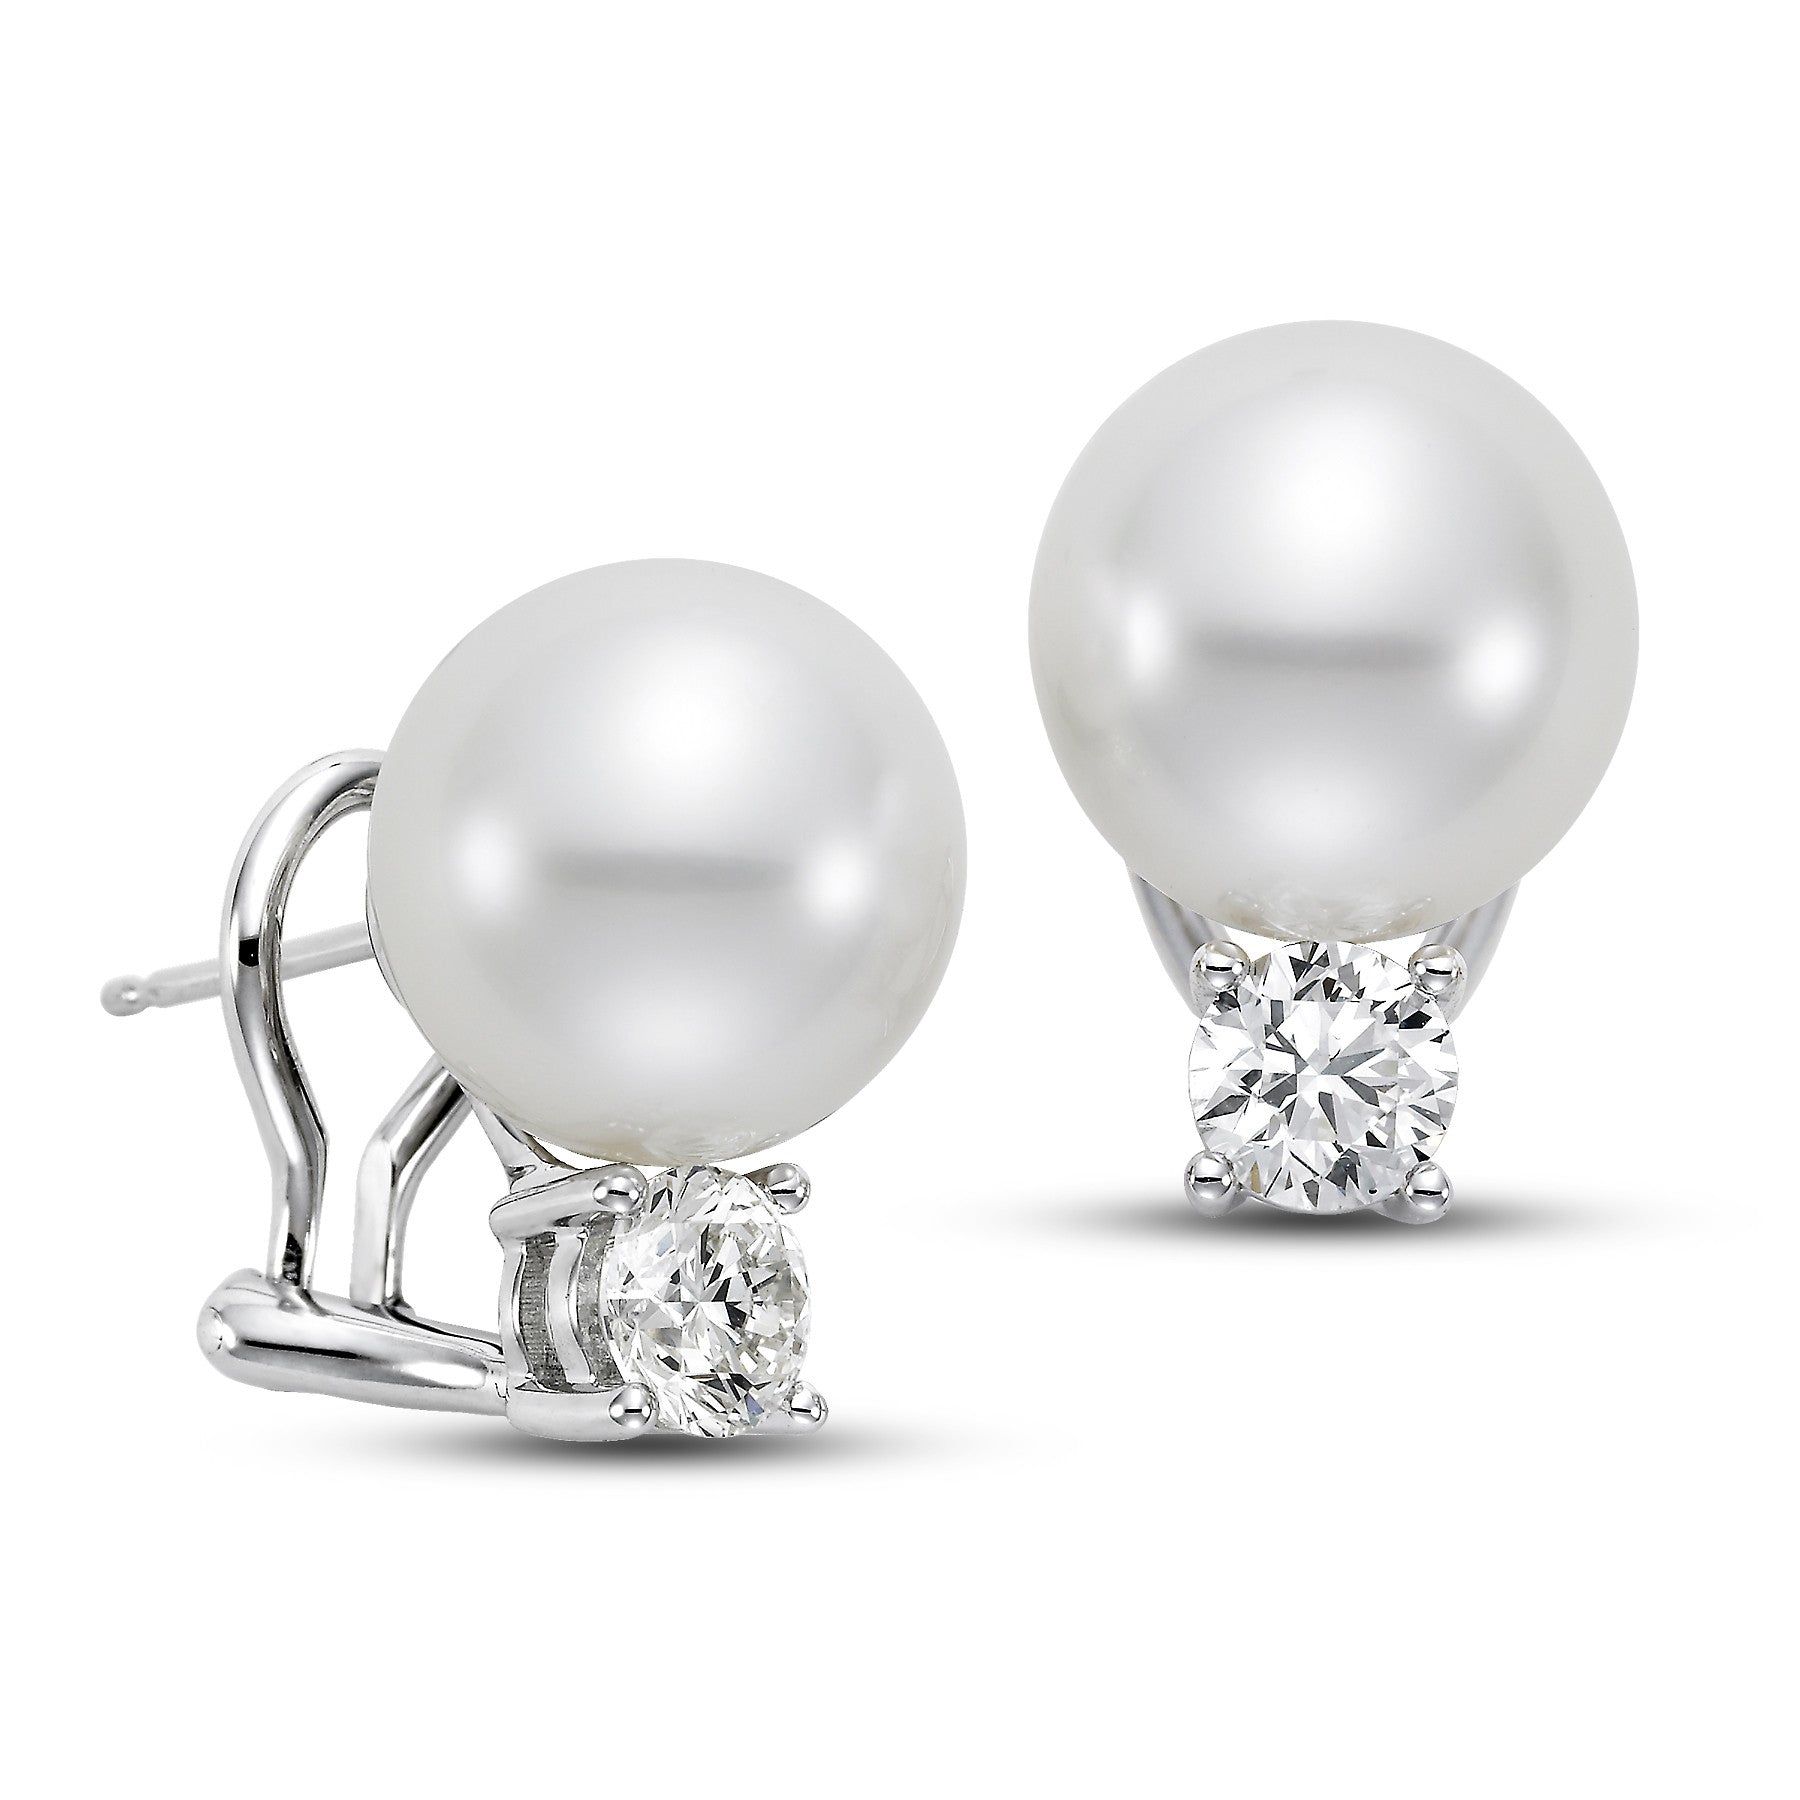 11mm White South Sea Cultured Pearl Earrings with 1.0 CTTW Diamonds - Isaac Westman - 2